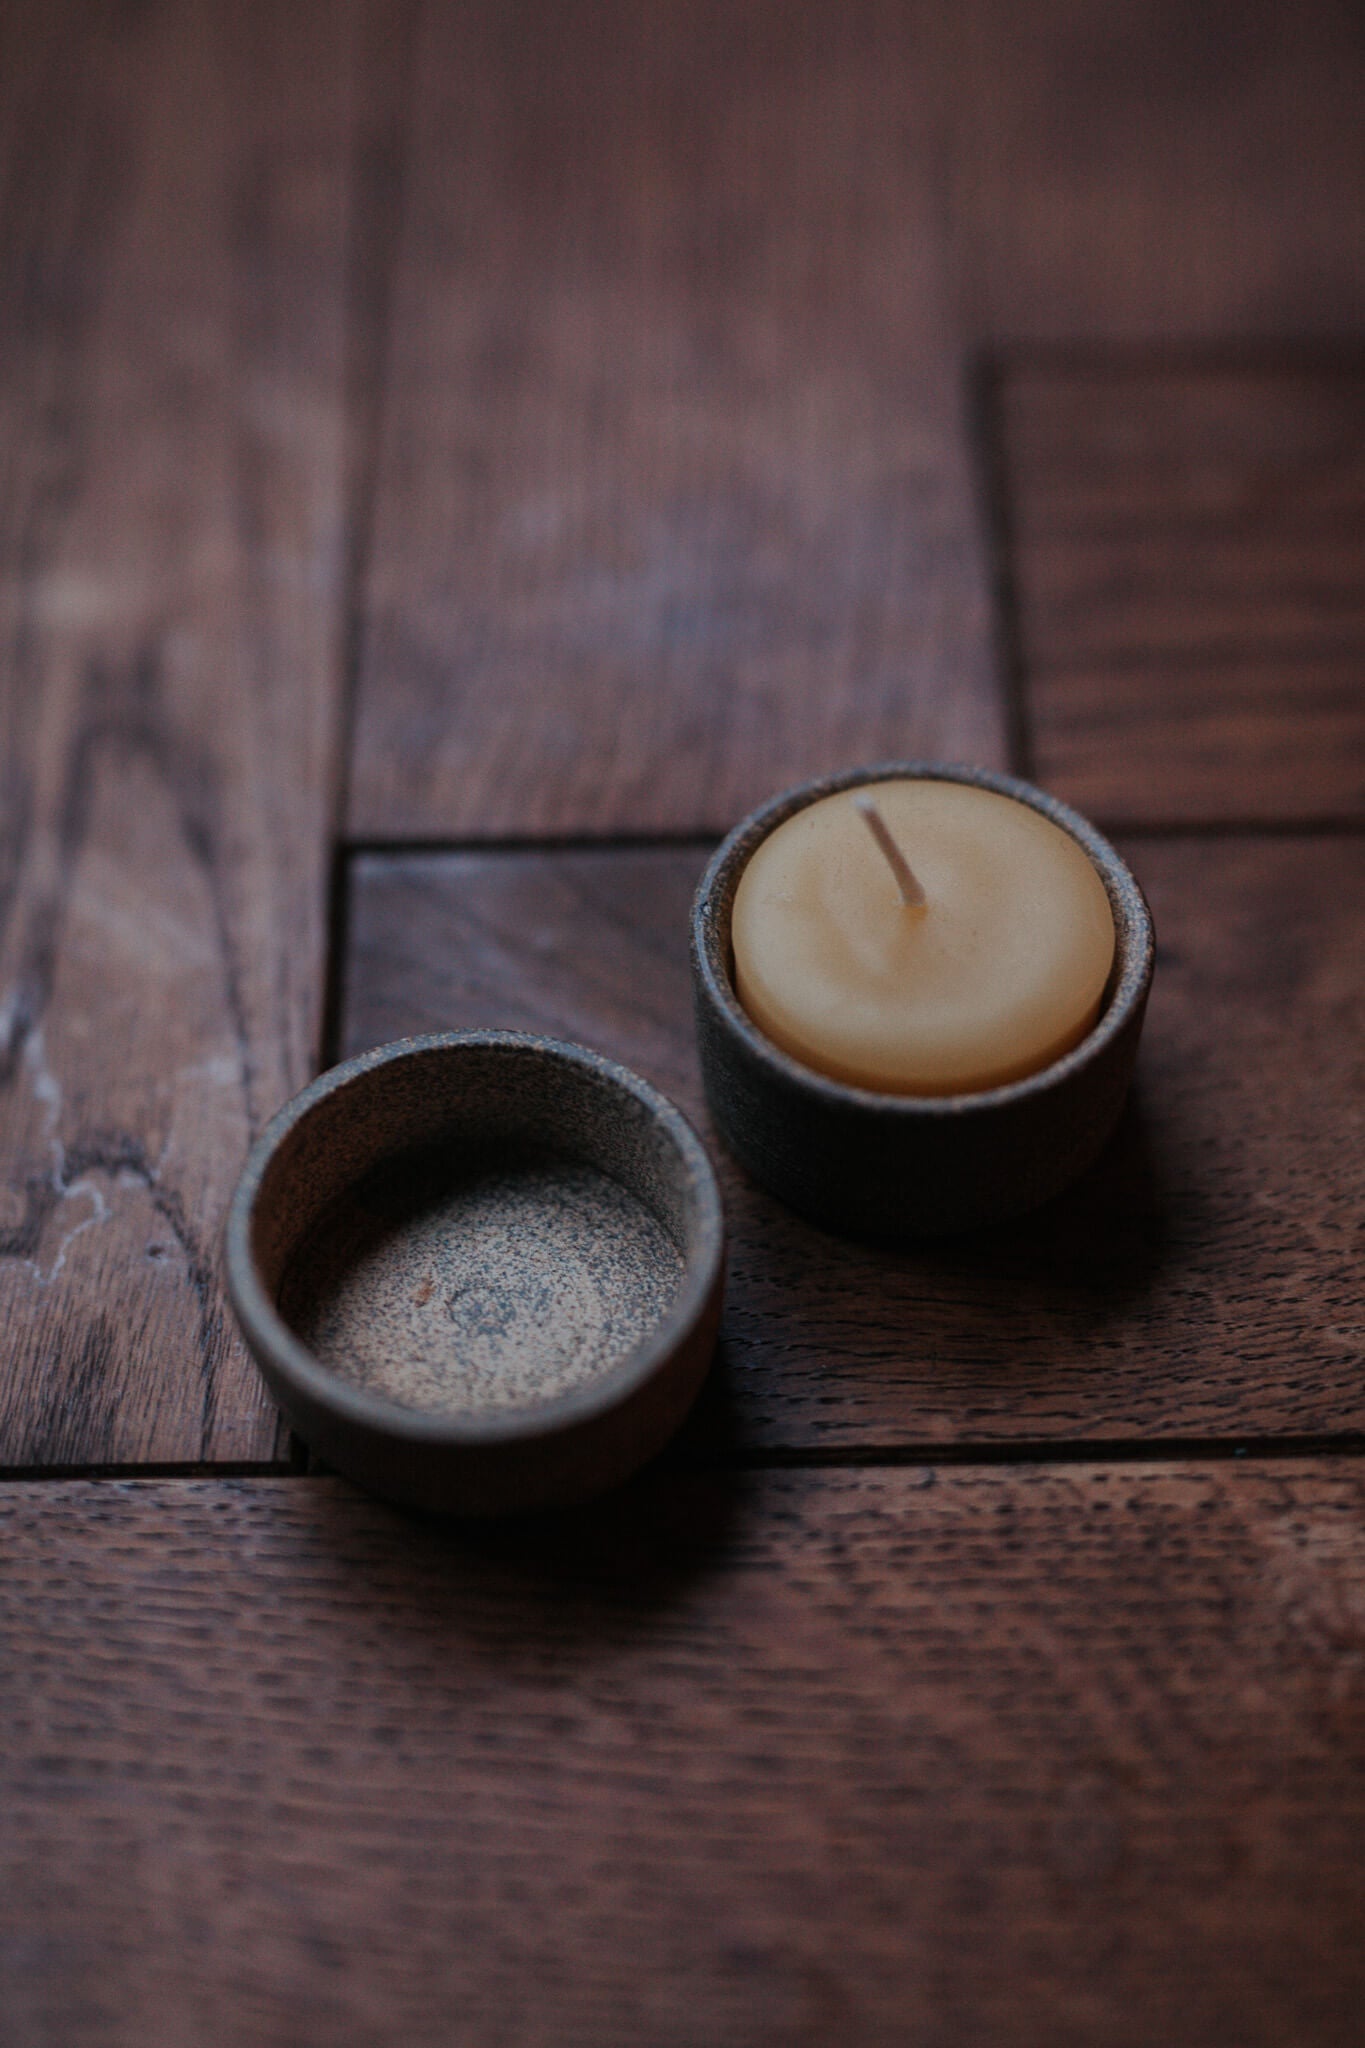 Hand Turned Stoneware Candle Holders by Noosa Pottery Studio キャンドルホルダー